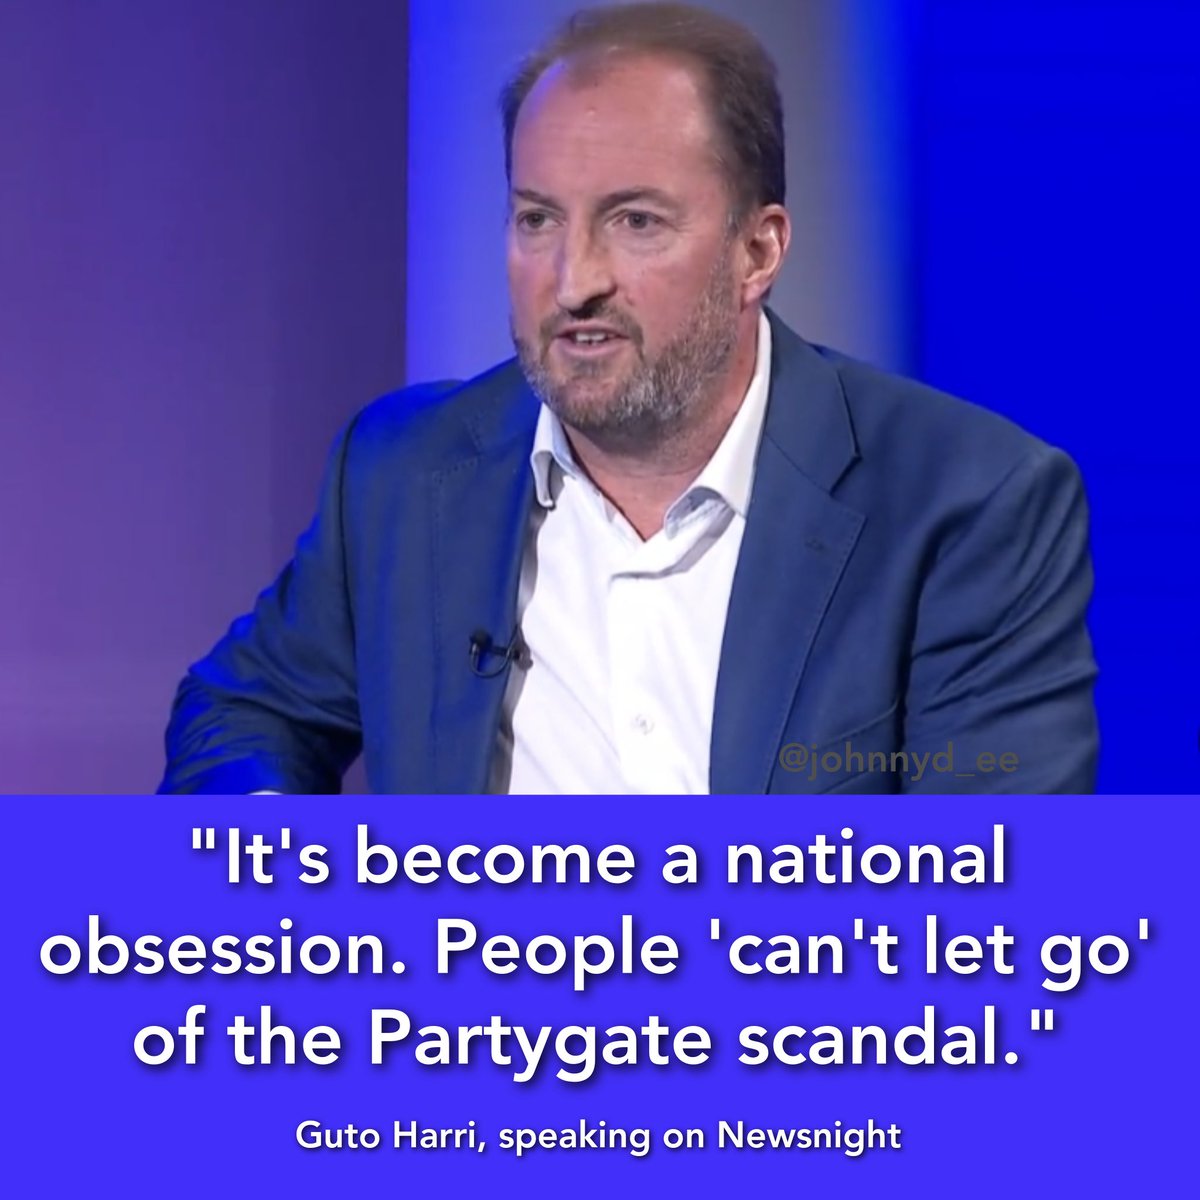 🚨 #BorisJohnson's former  Communications Chief #GutoHarri, has his say on  #Newsnight about the Partygate scandal. 

FAO, Guto Harri - WE will NEVER let go! 

#BorisTheLiar #BorisOut #ToriesCorruptToTheCore
#ToriesPartiedWhilePeopleDied 
#ToryLies #ToryLiars

📺 @BBCNewsnight